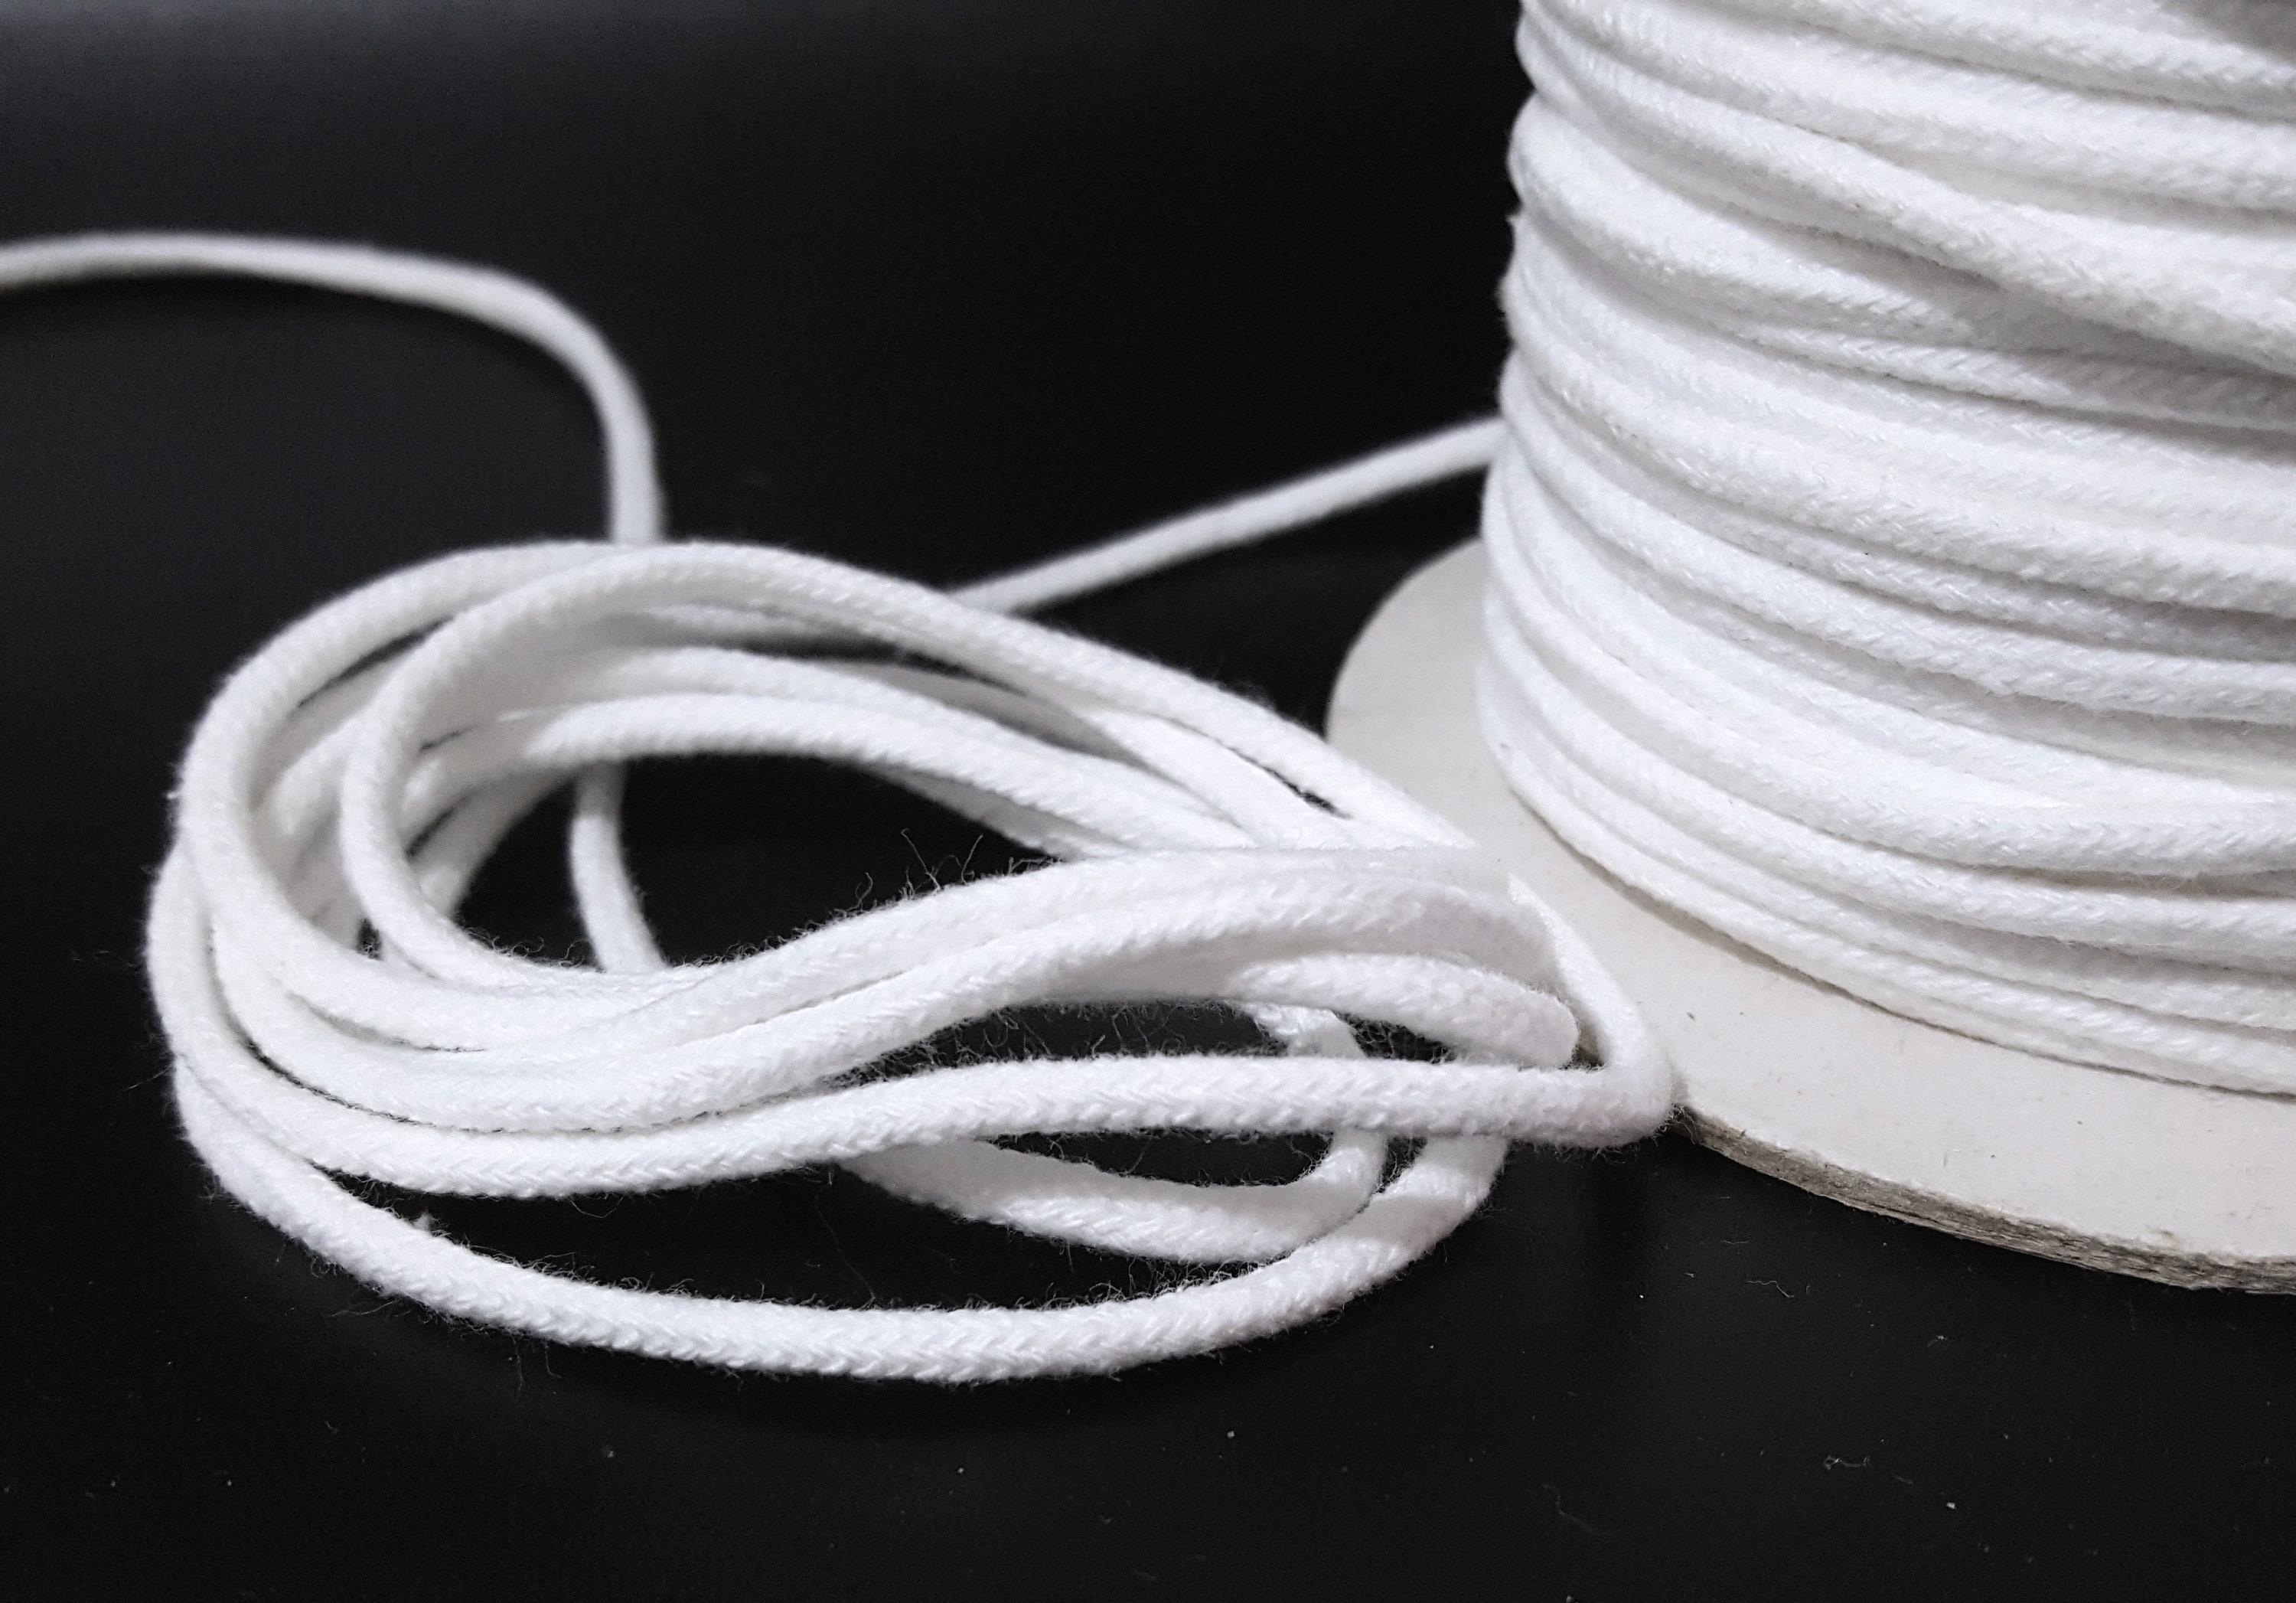 Hoodie Drawstring Cord,tipped Stoppers 100% Cotton.finest Quality Round  Rope 185cms Long.transparent Locked End Tips,no Fraying.neotrims UK 